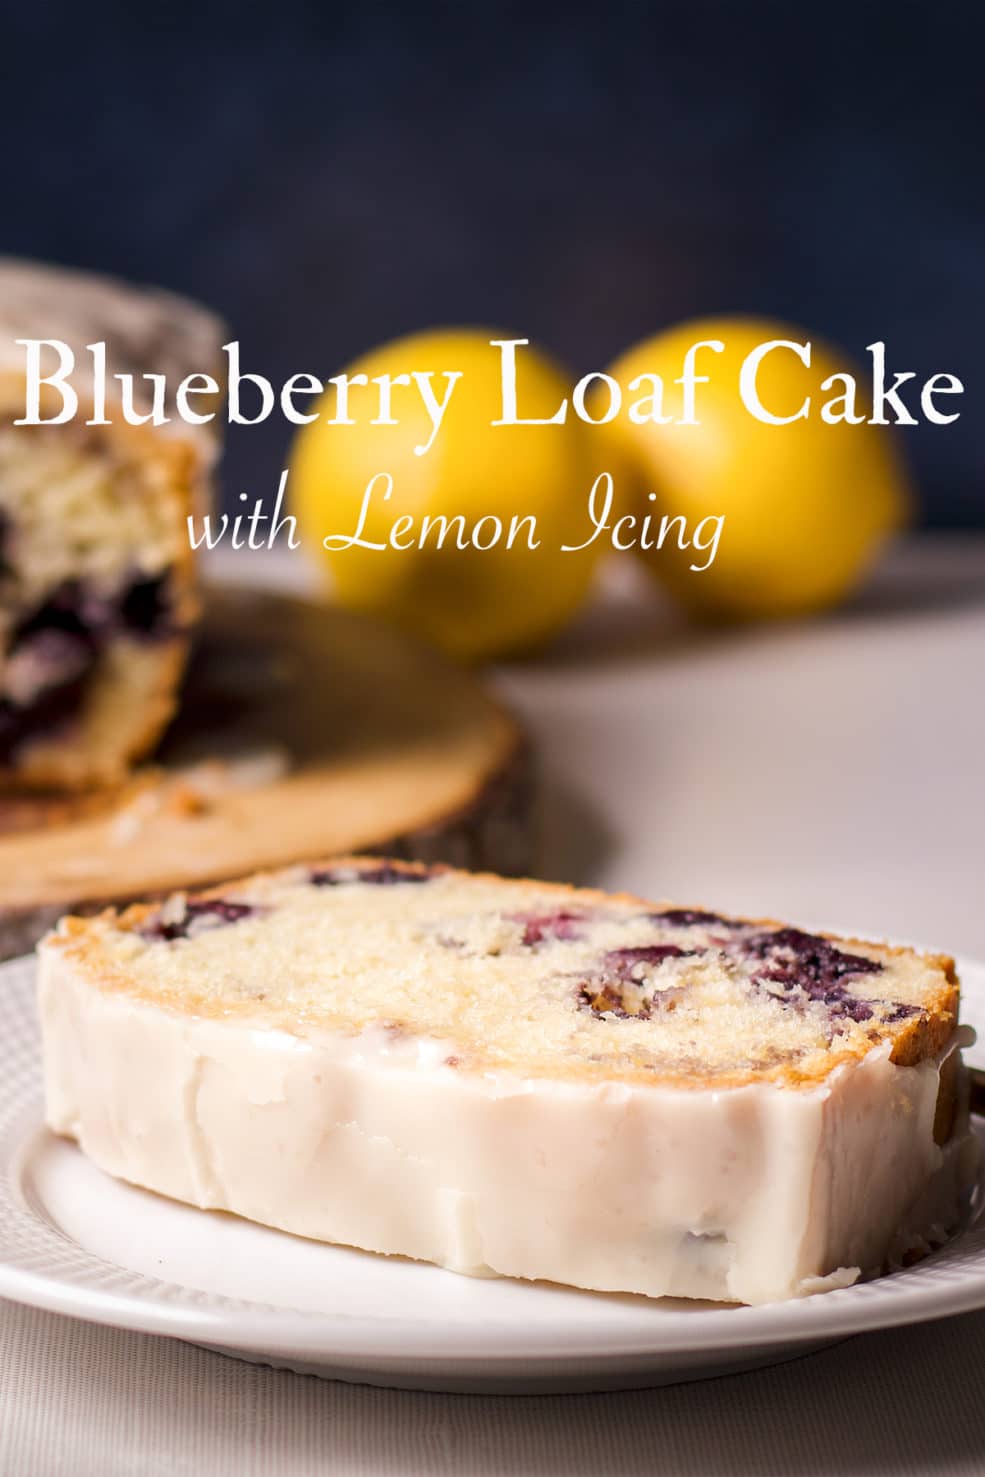 A slice of blueberry loaf cake with lemon icing on a white plate.